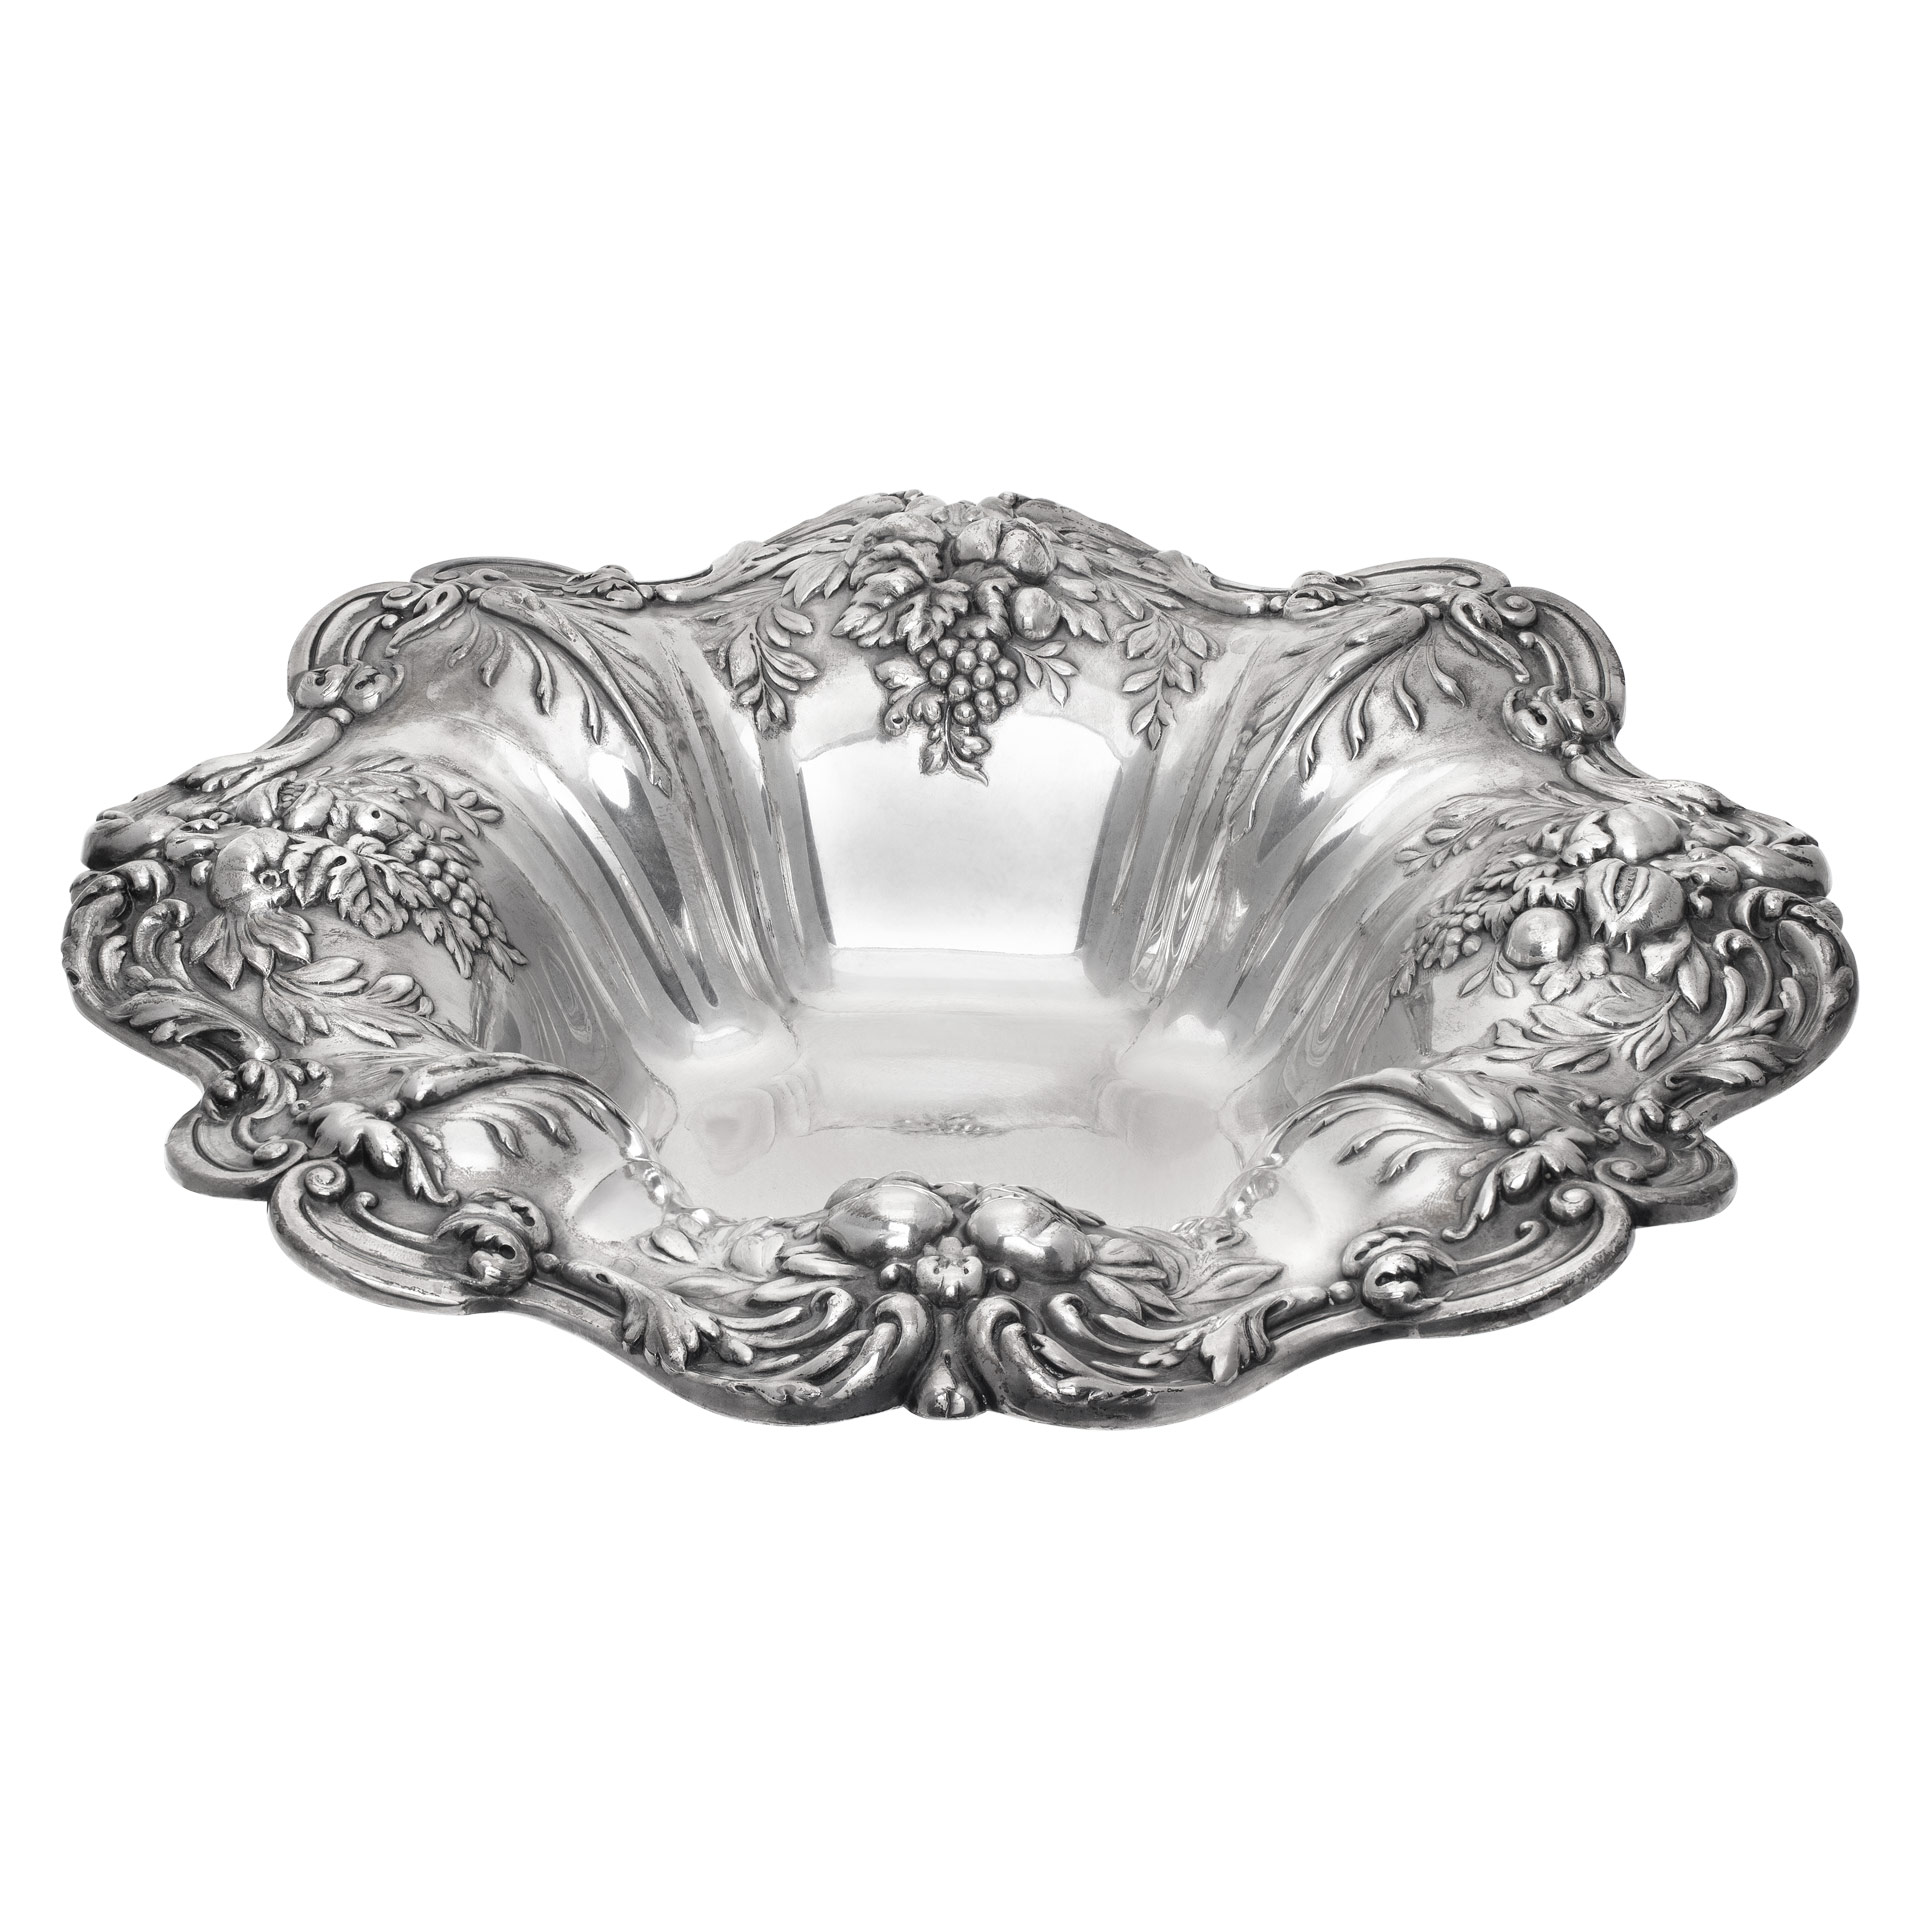 Art Nouveau "Francis I" Sterling Silver Serving Bowl patented in 1907 by Reed and Barton. image 1